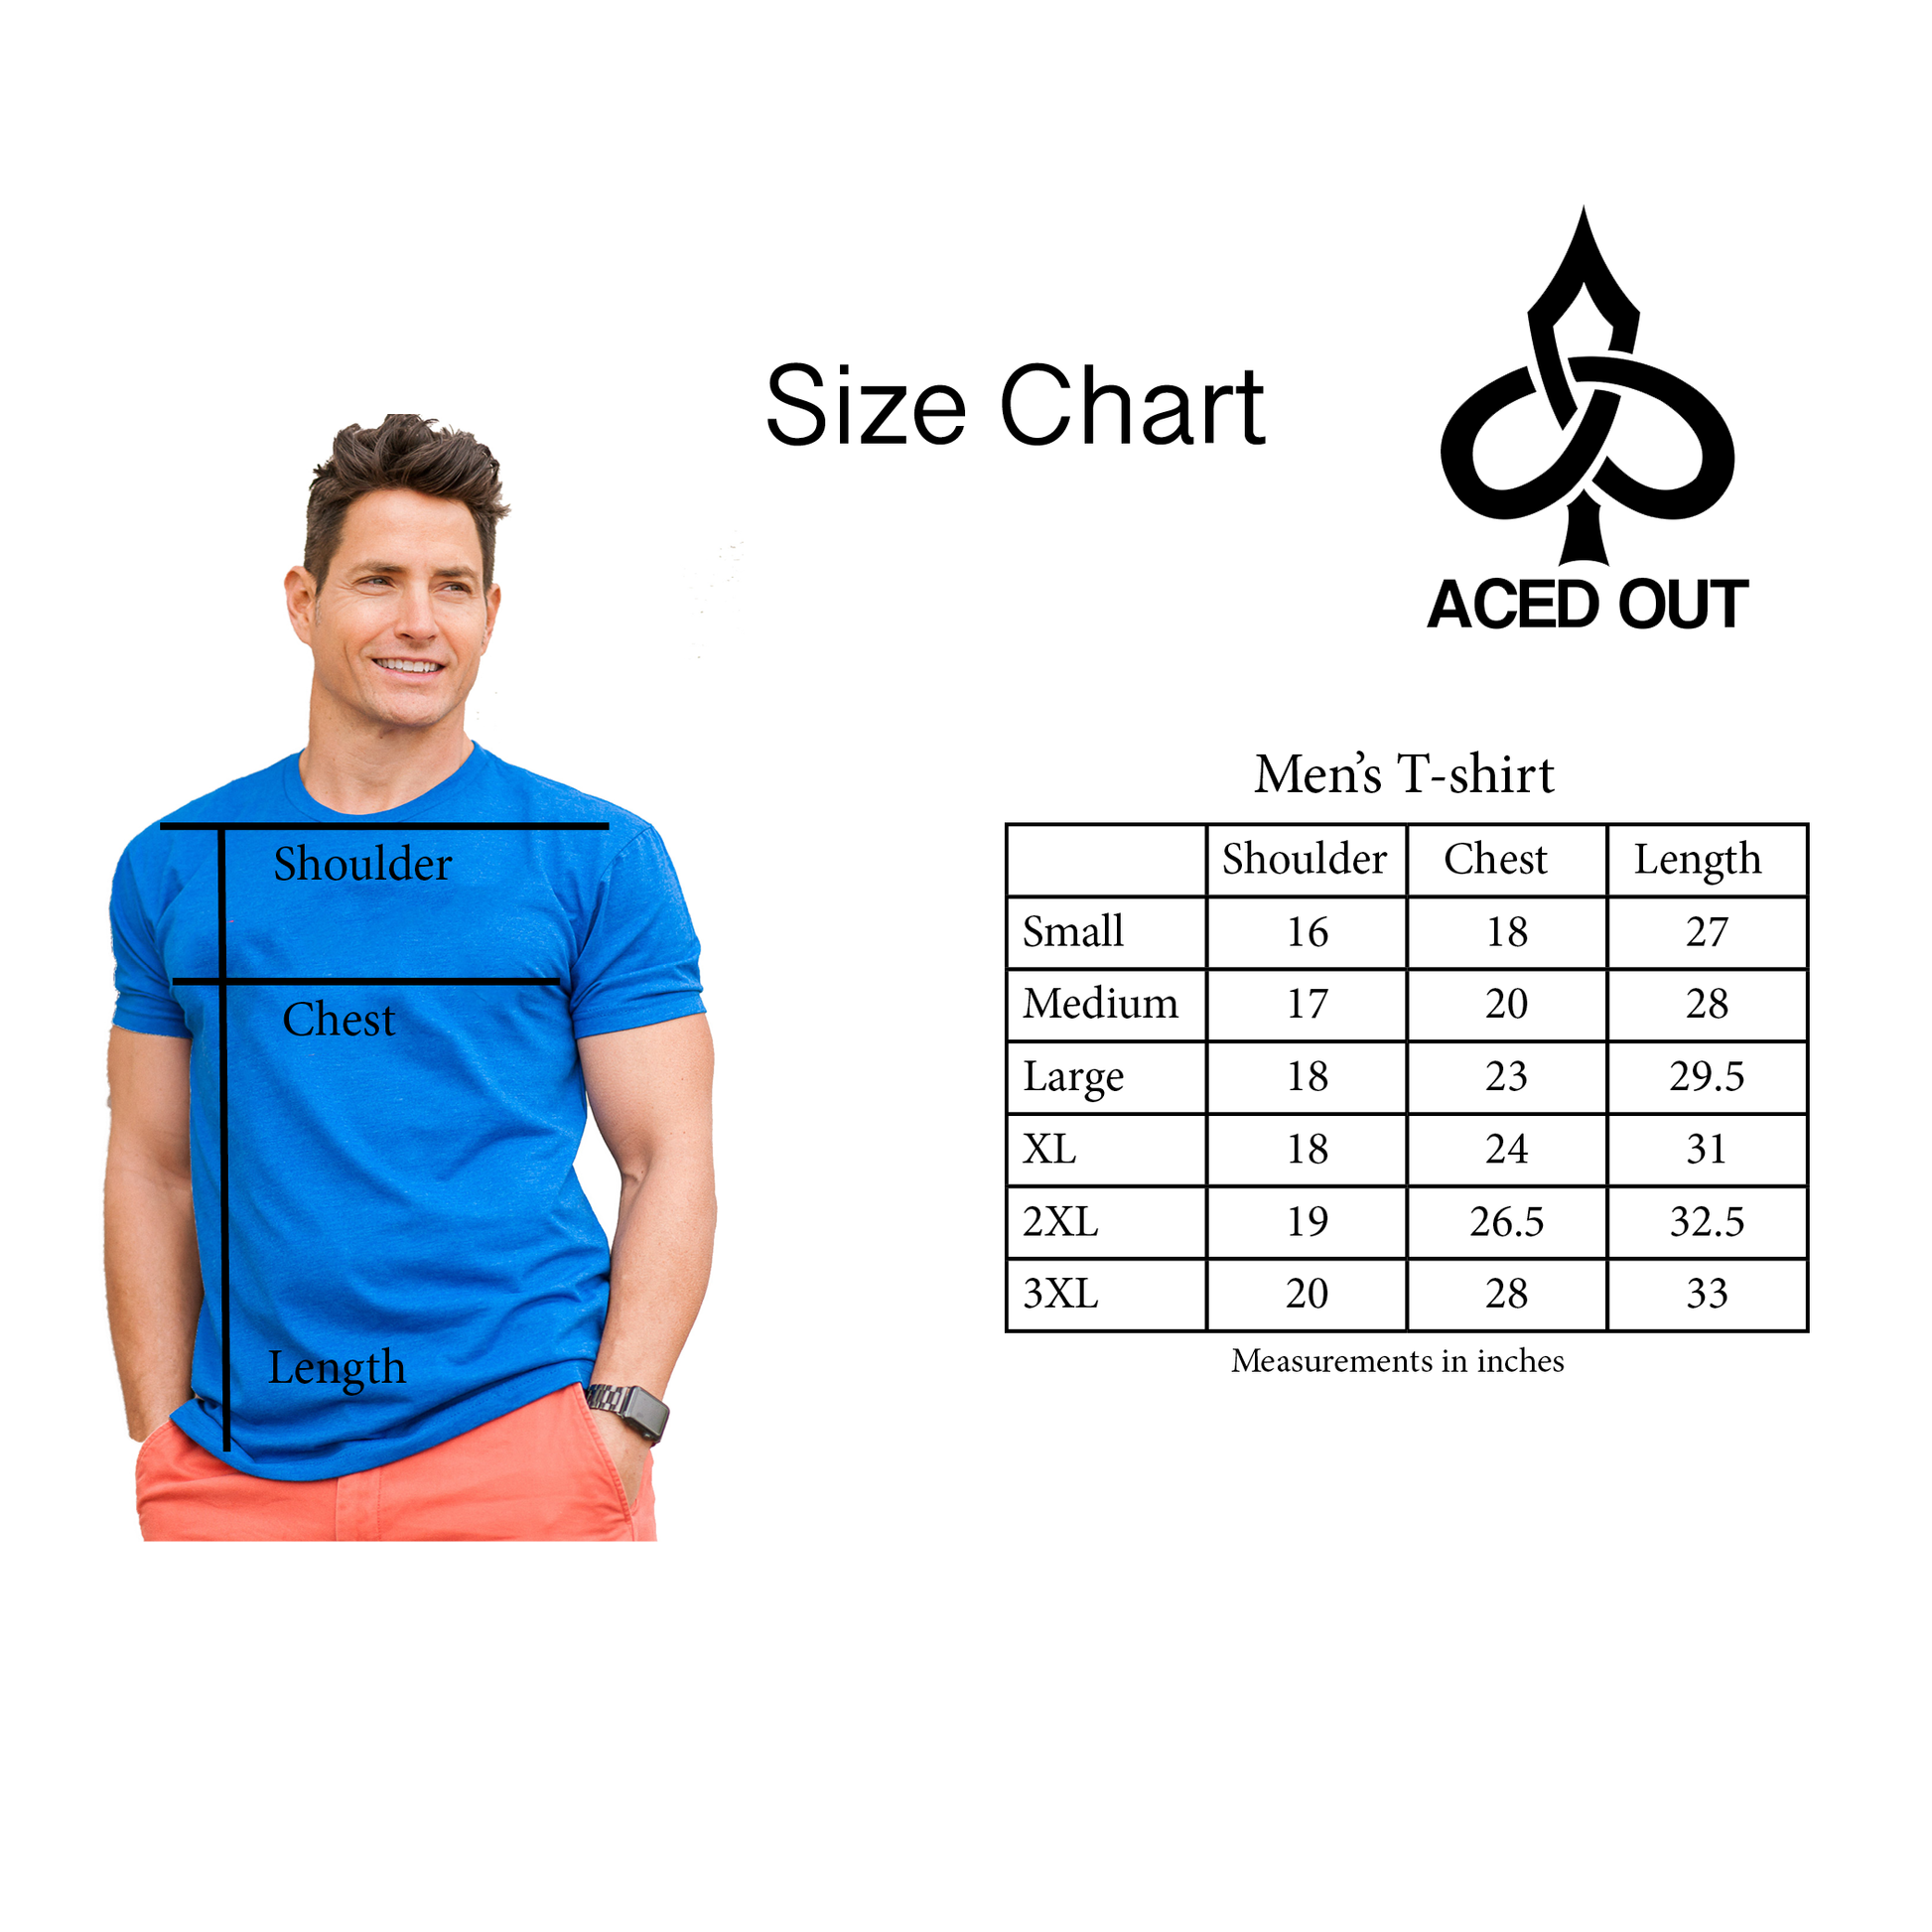 Aced Out Apparel George Brett 5 Small